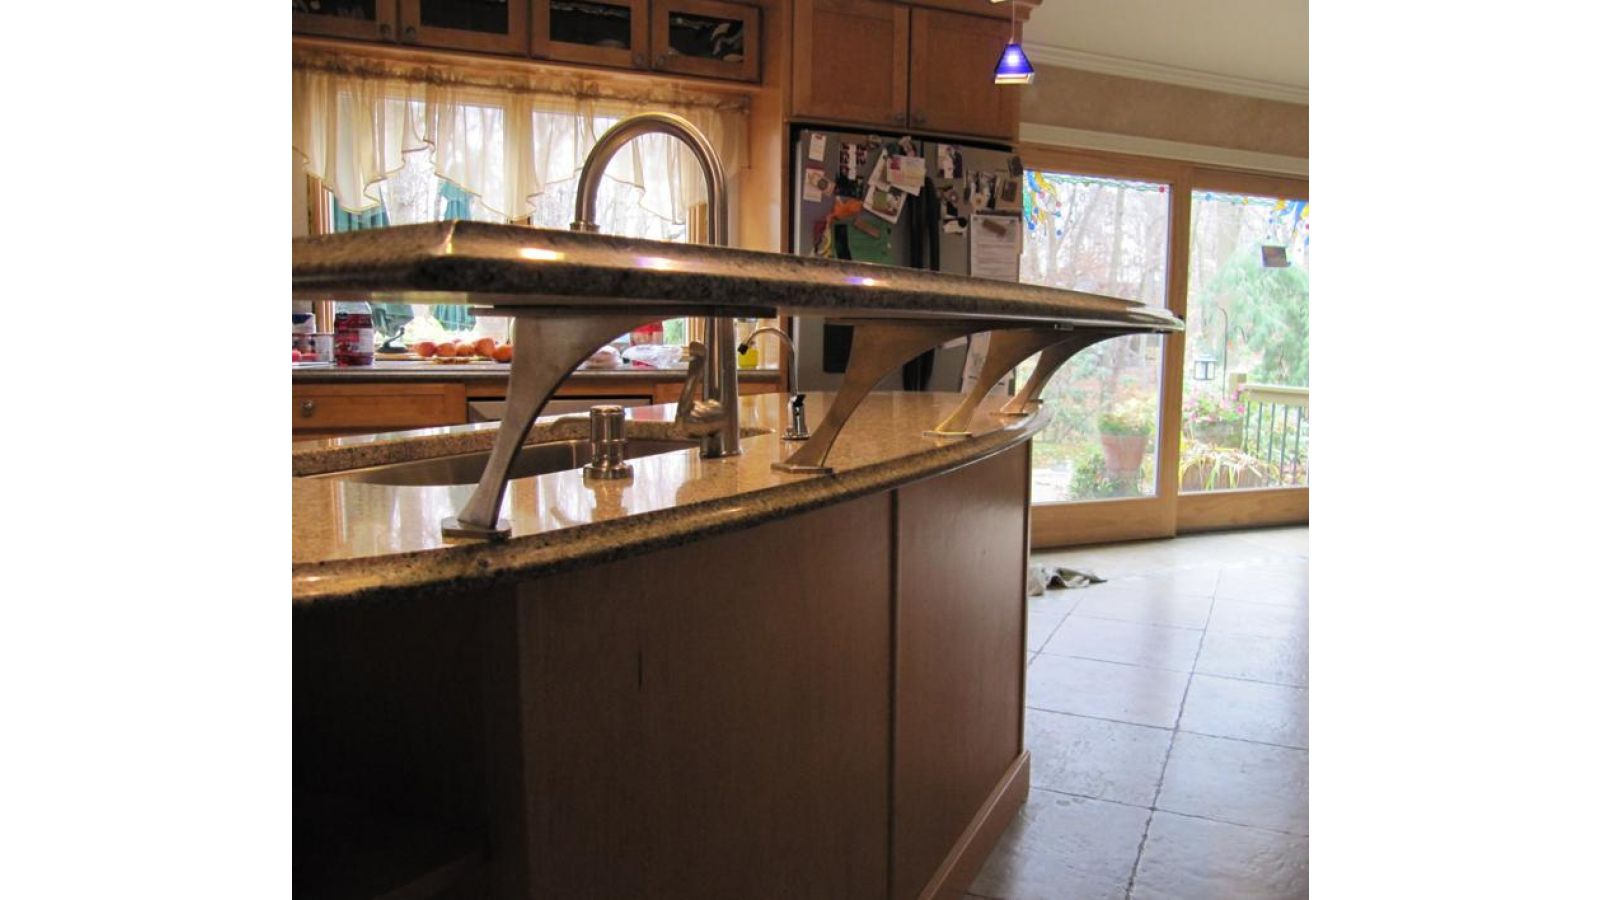 The Foremont Countertop Support